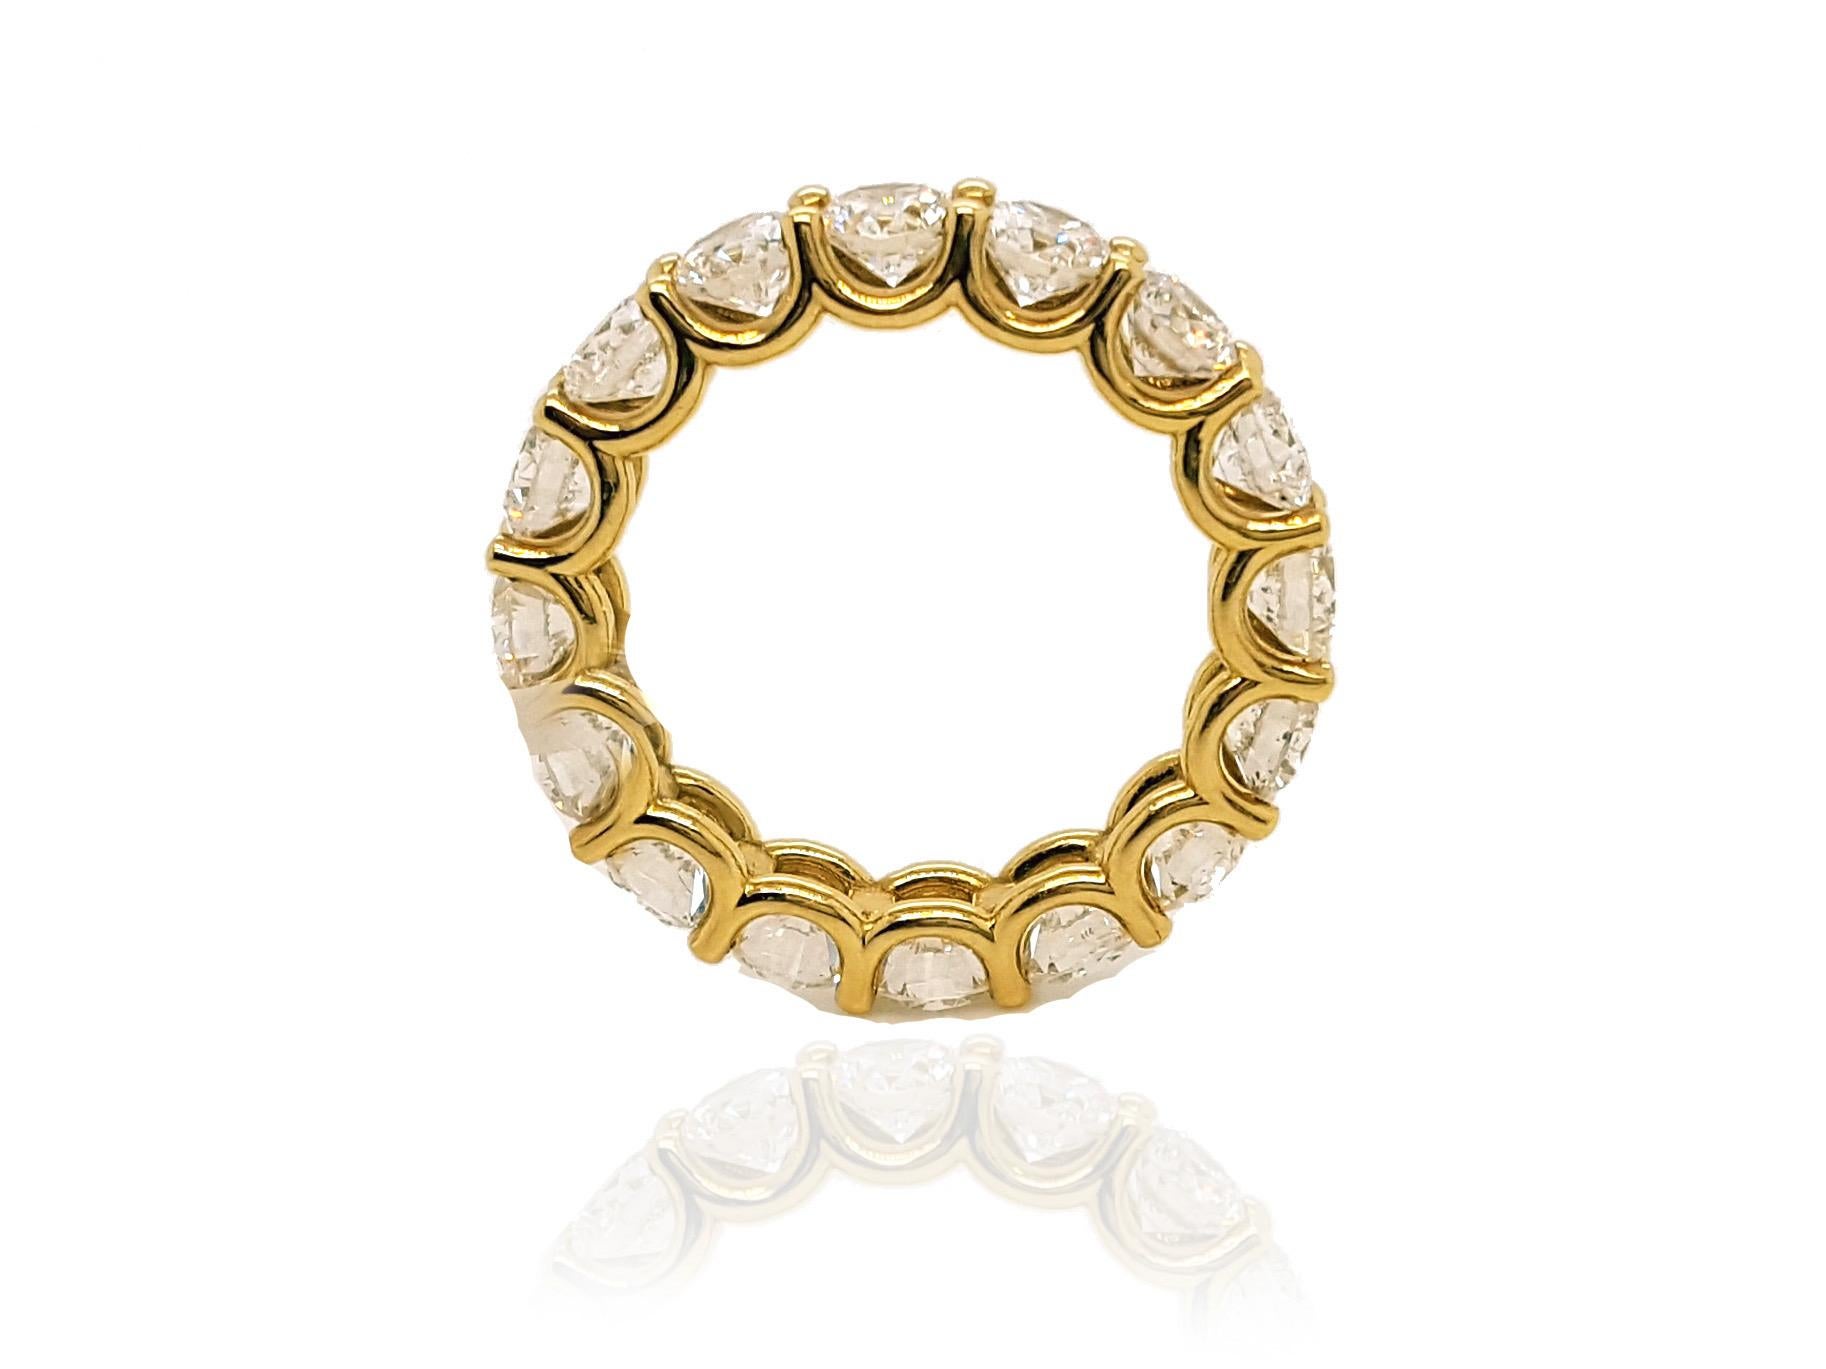 Round Cut 4.97 Carat Round Brilliant Cut Diamond Eternity Band Set in 18K Yellow Gold For Sale